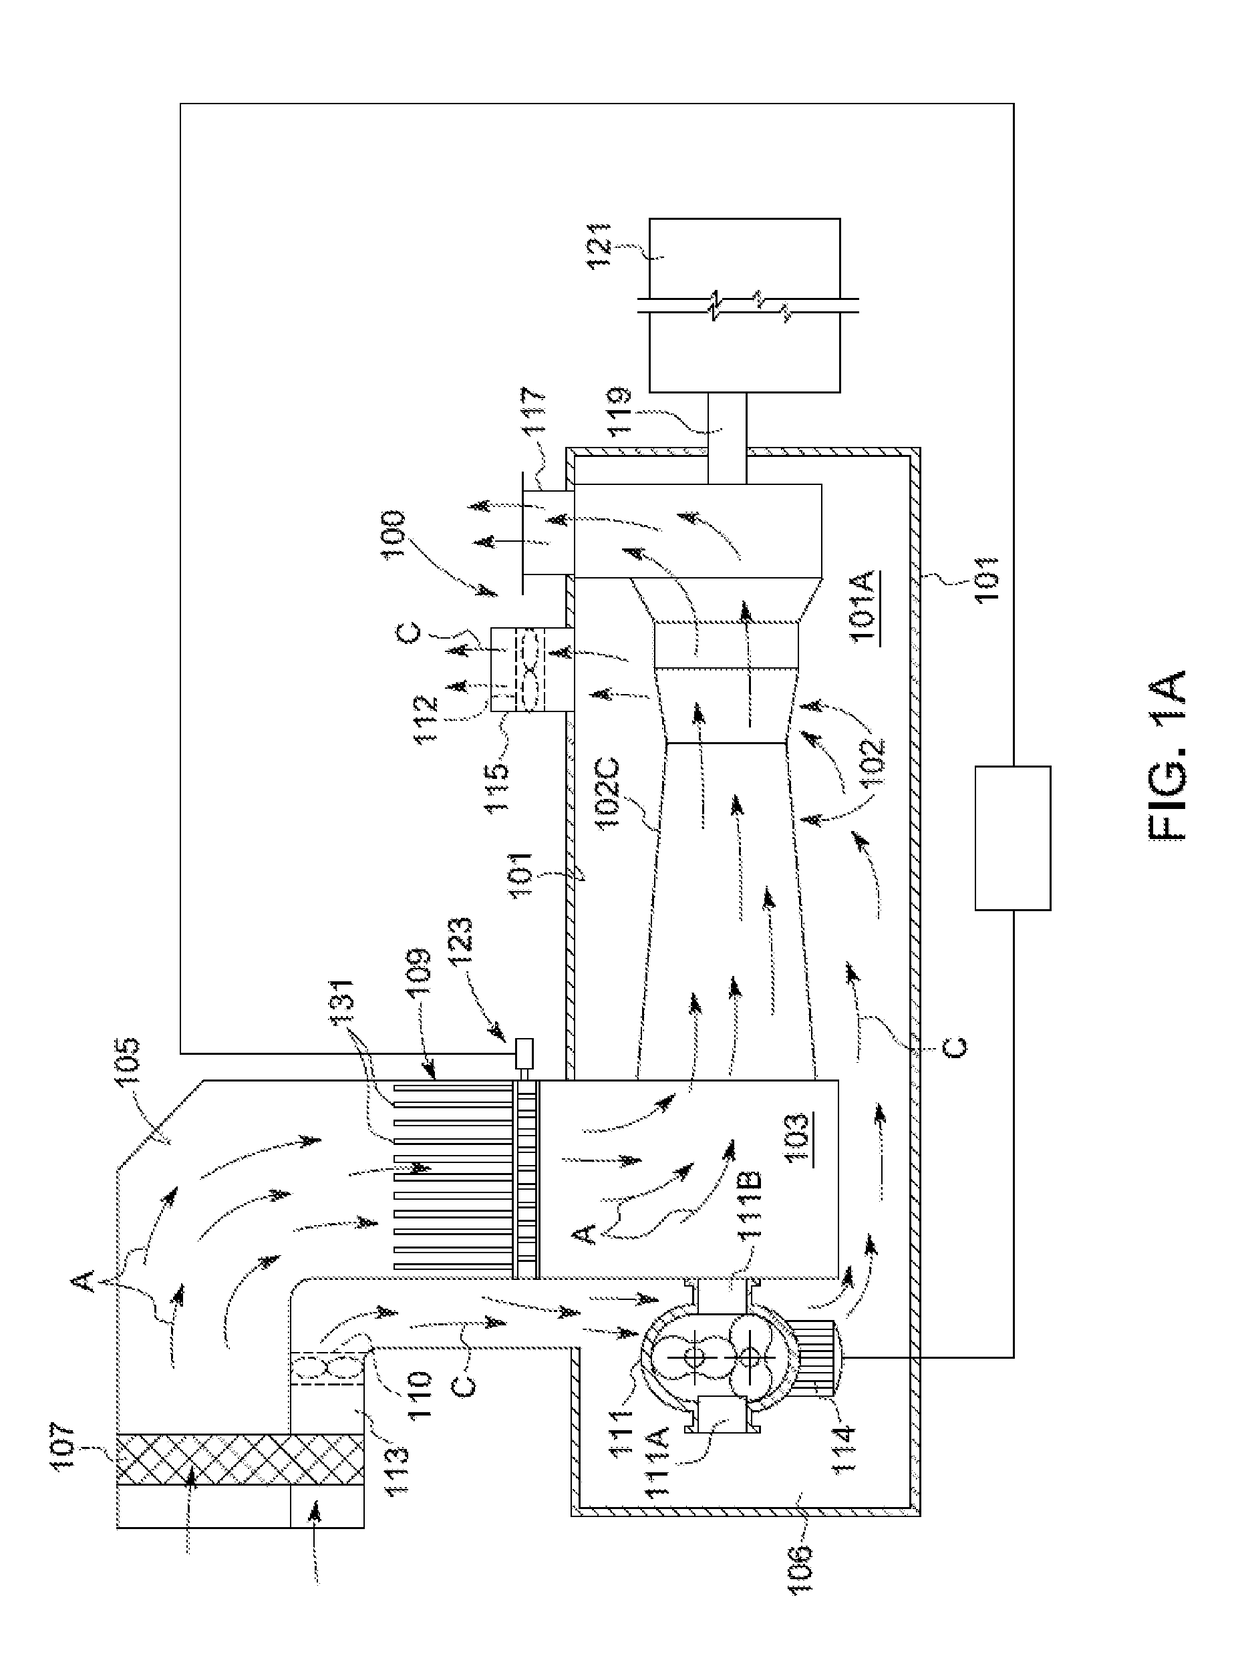 Device and method for gas turbine unlocking